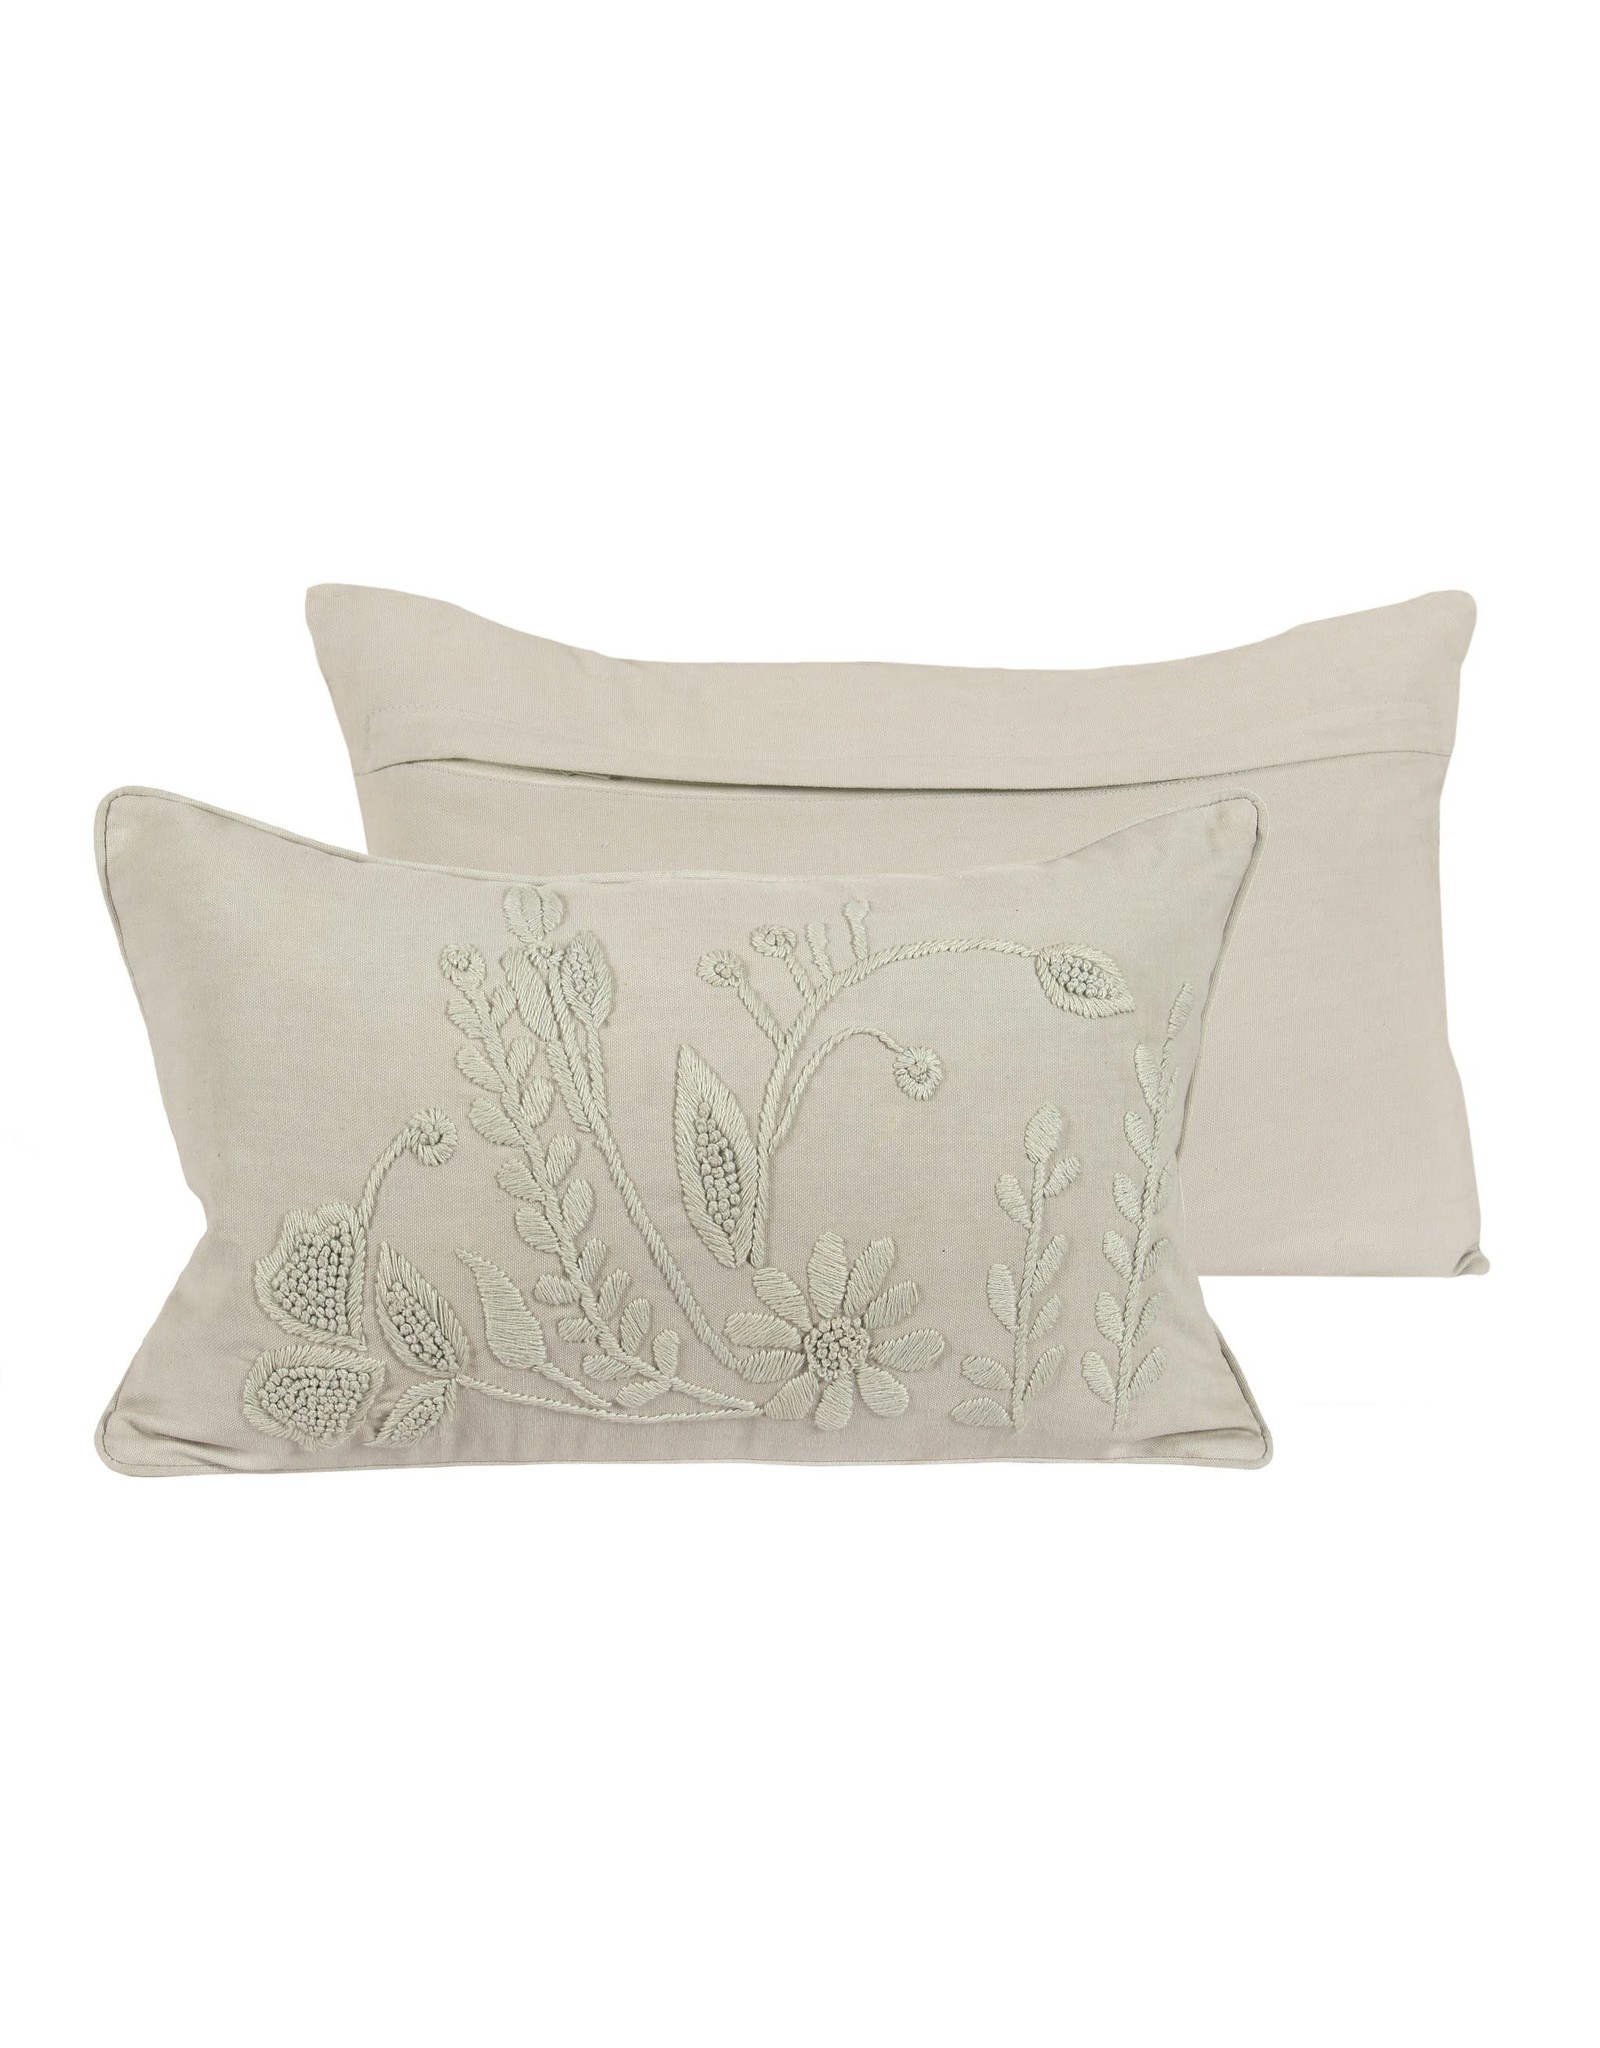 Green Embroidered Flower Pillow